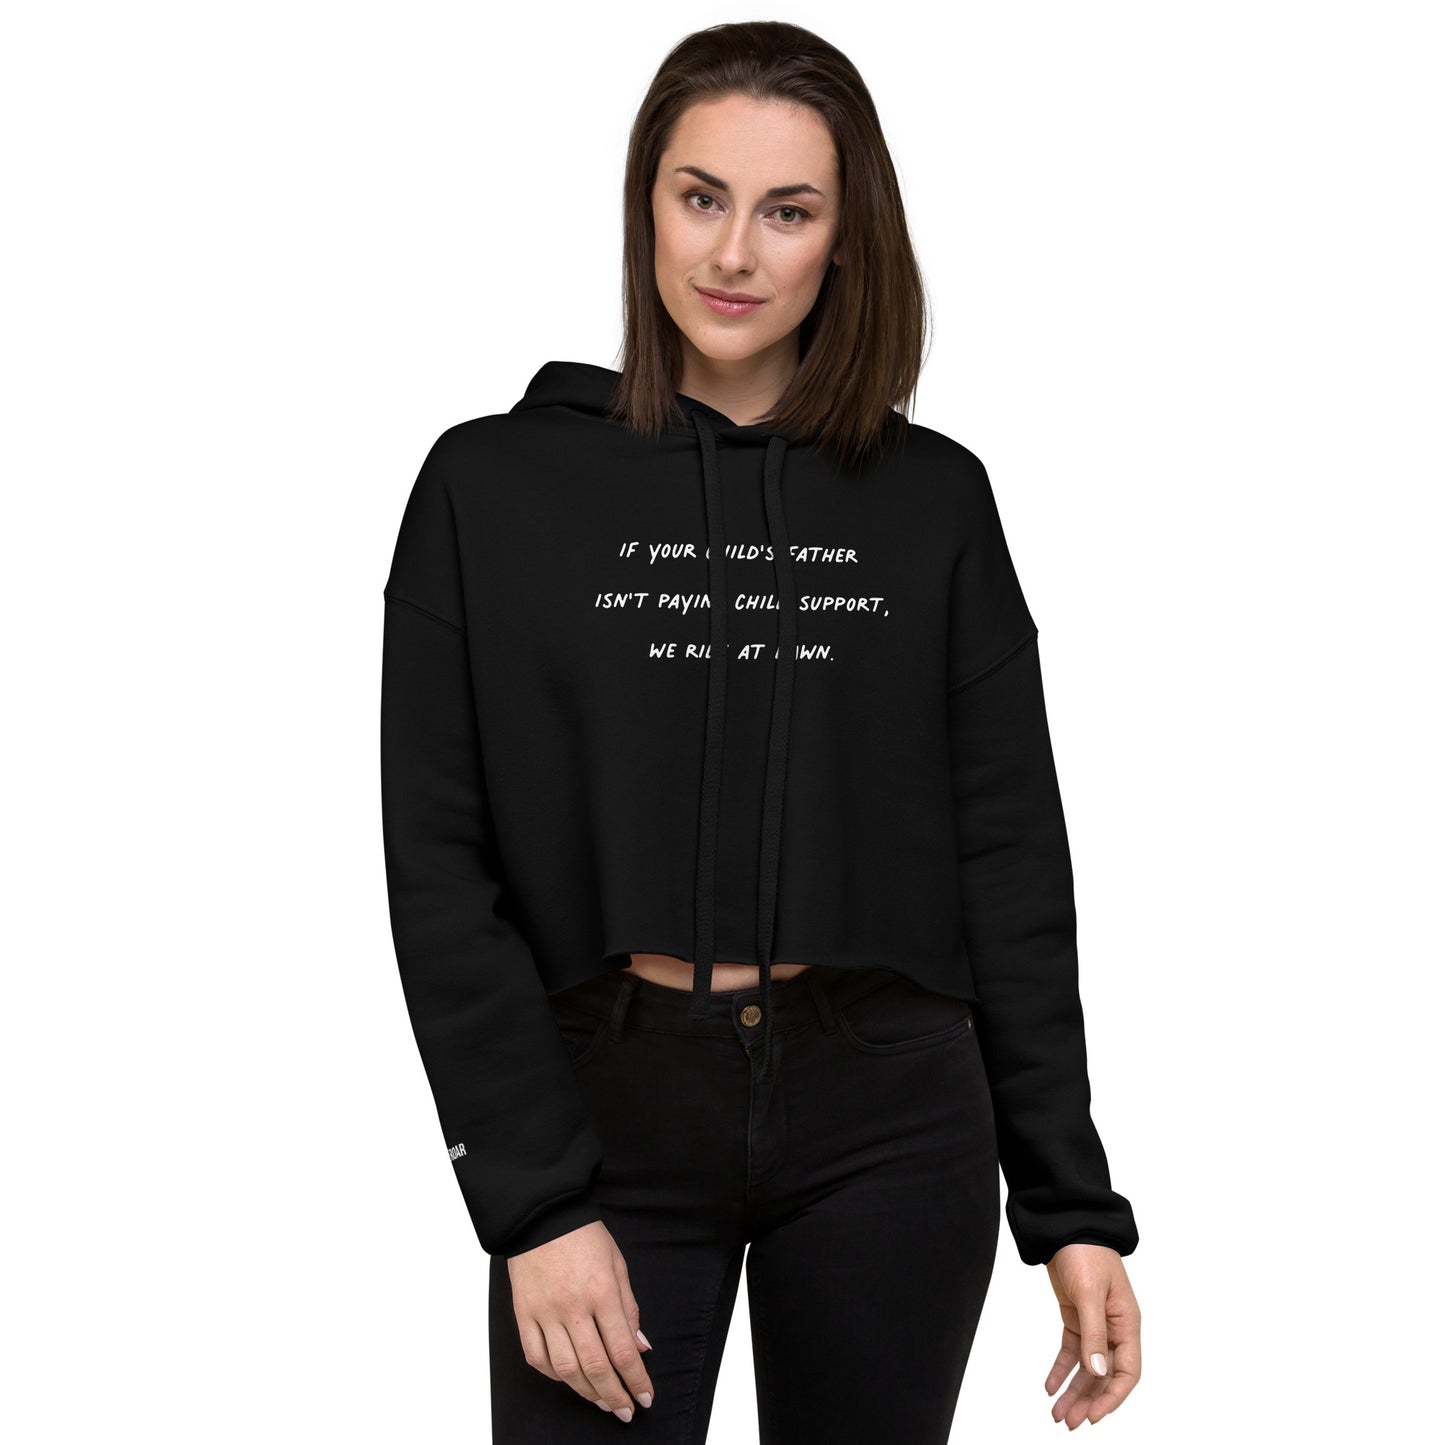 If Your Child's Father Isn't Paying Child Support, We Ride At Dawn Embroidered Crop Hoodie